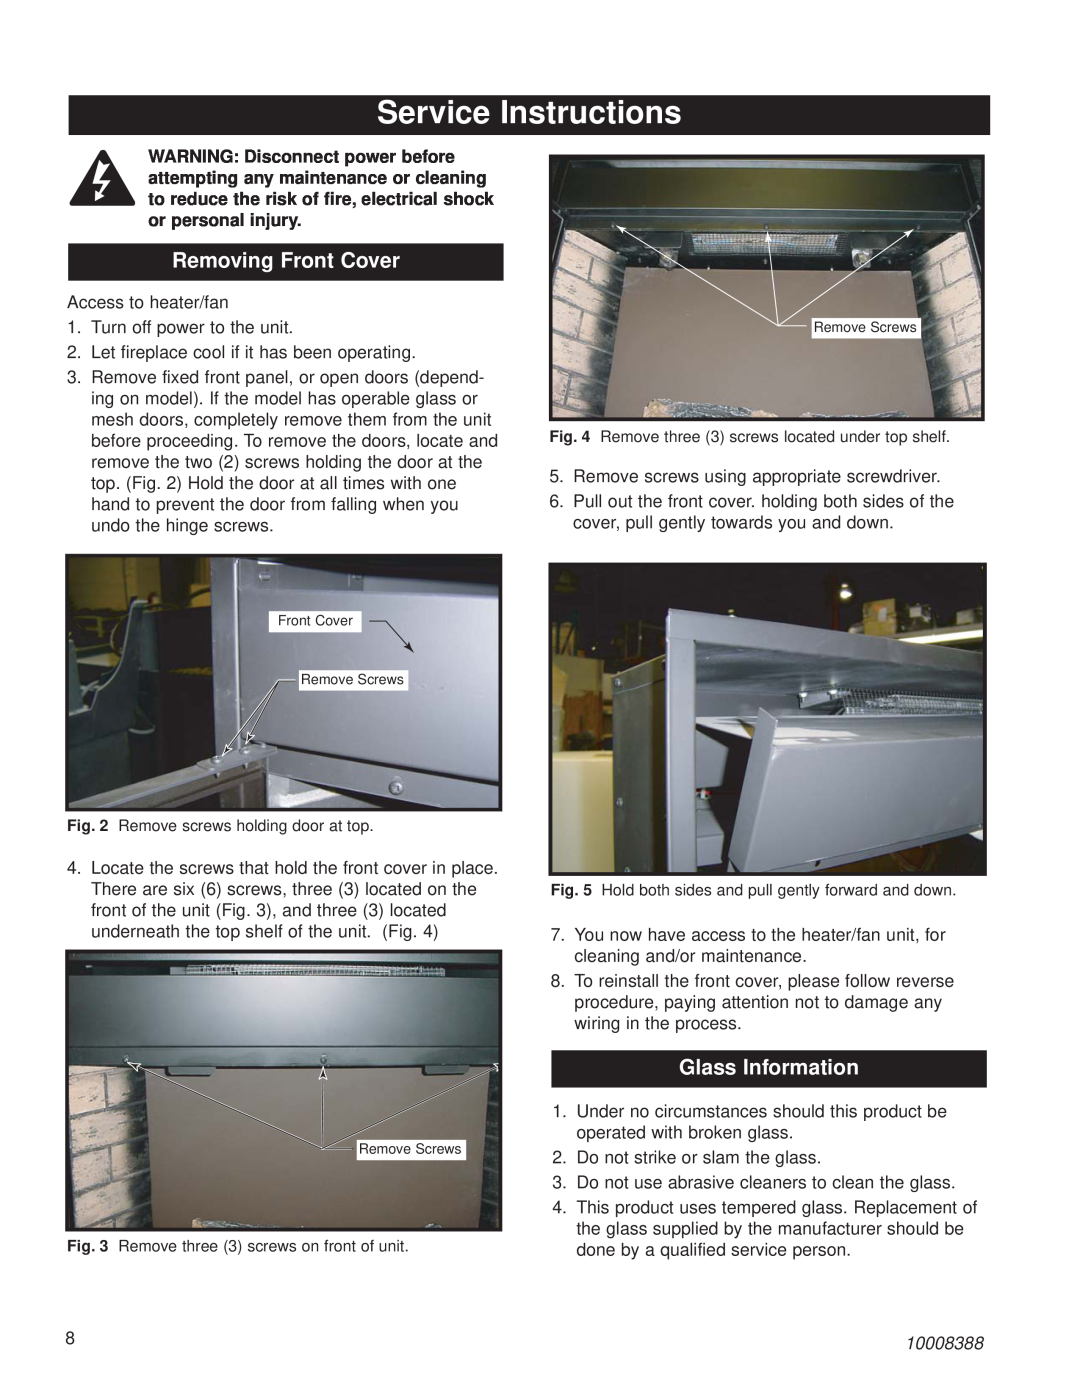 CFM Corporation HEF22 installation instructions Service Instructions, Removing Front Cover, Glass Information, 10008388 